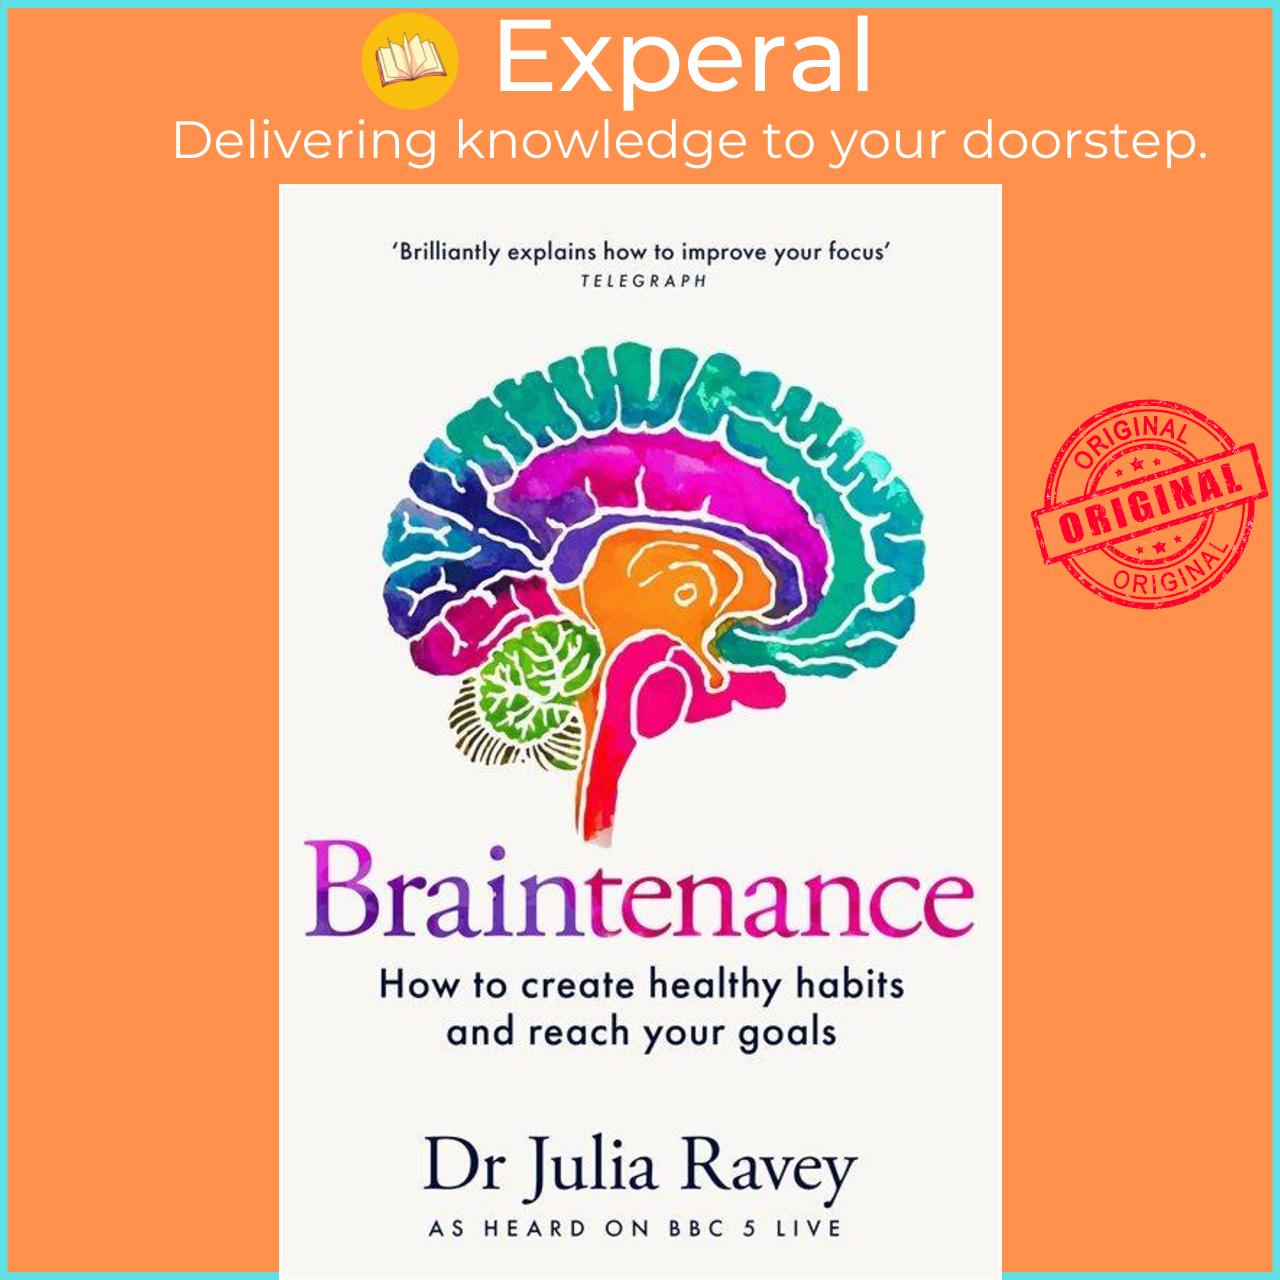 Sách - Braintenance - How to create healthy habits and reach your goals by Dr Julia Ravey (UK edition, paperback)